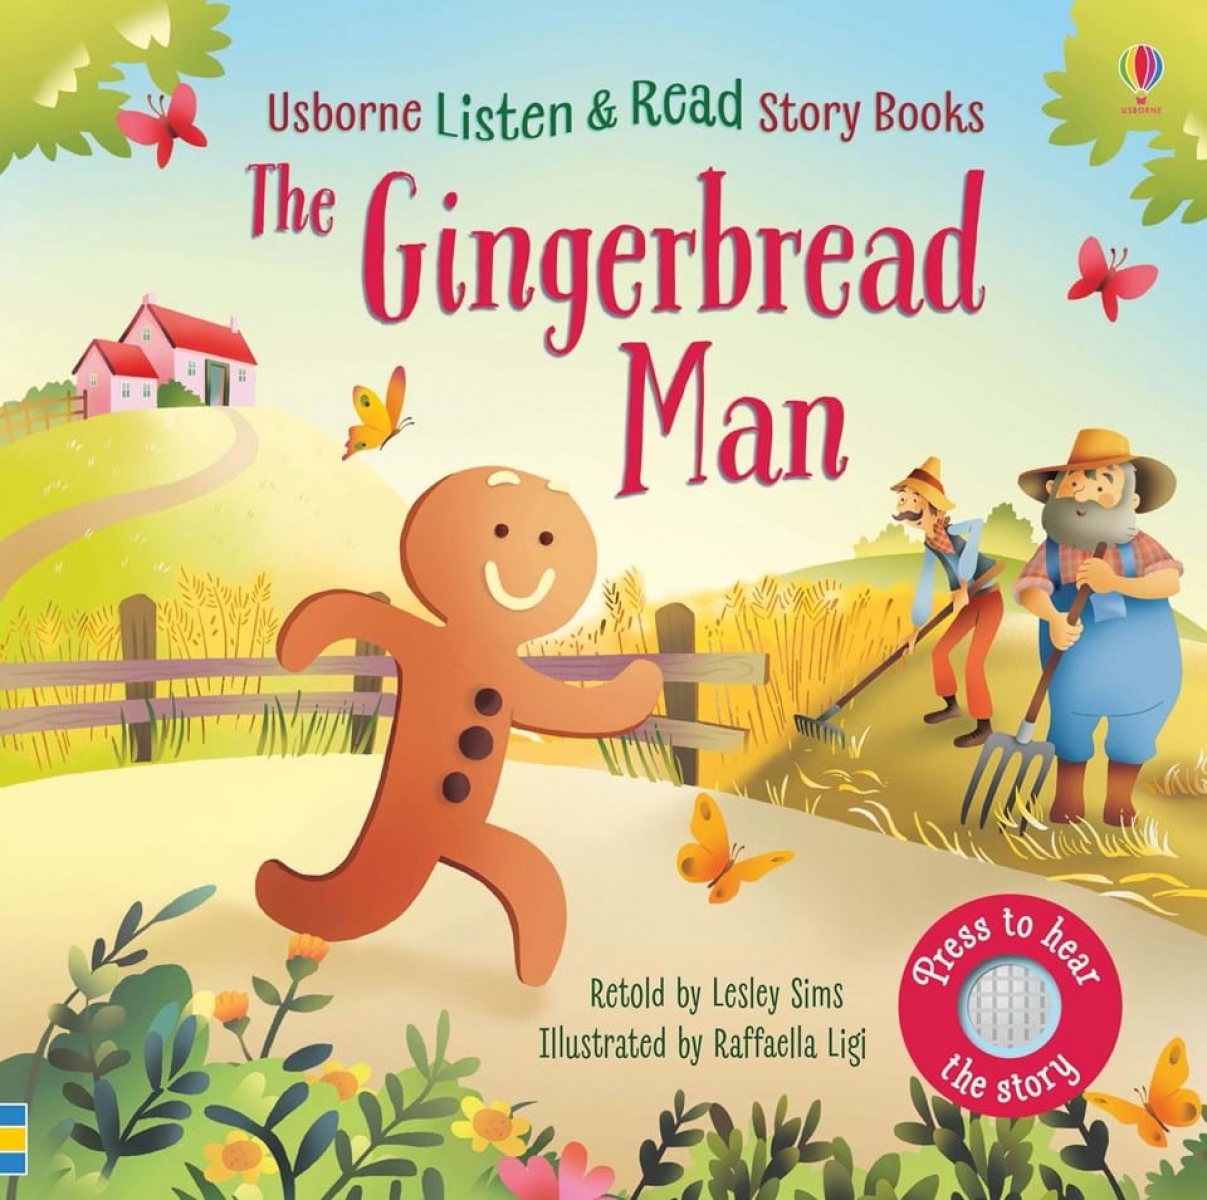 Sims Lesley Gingerbread Man Sound Book 